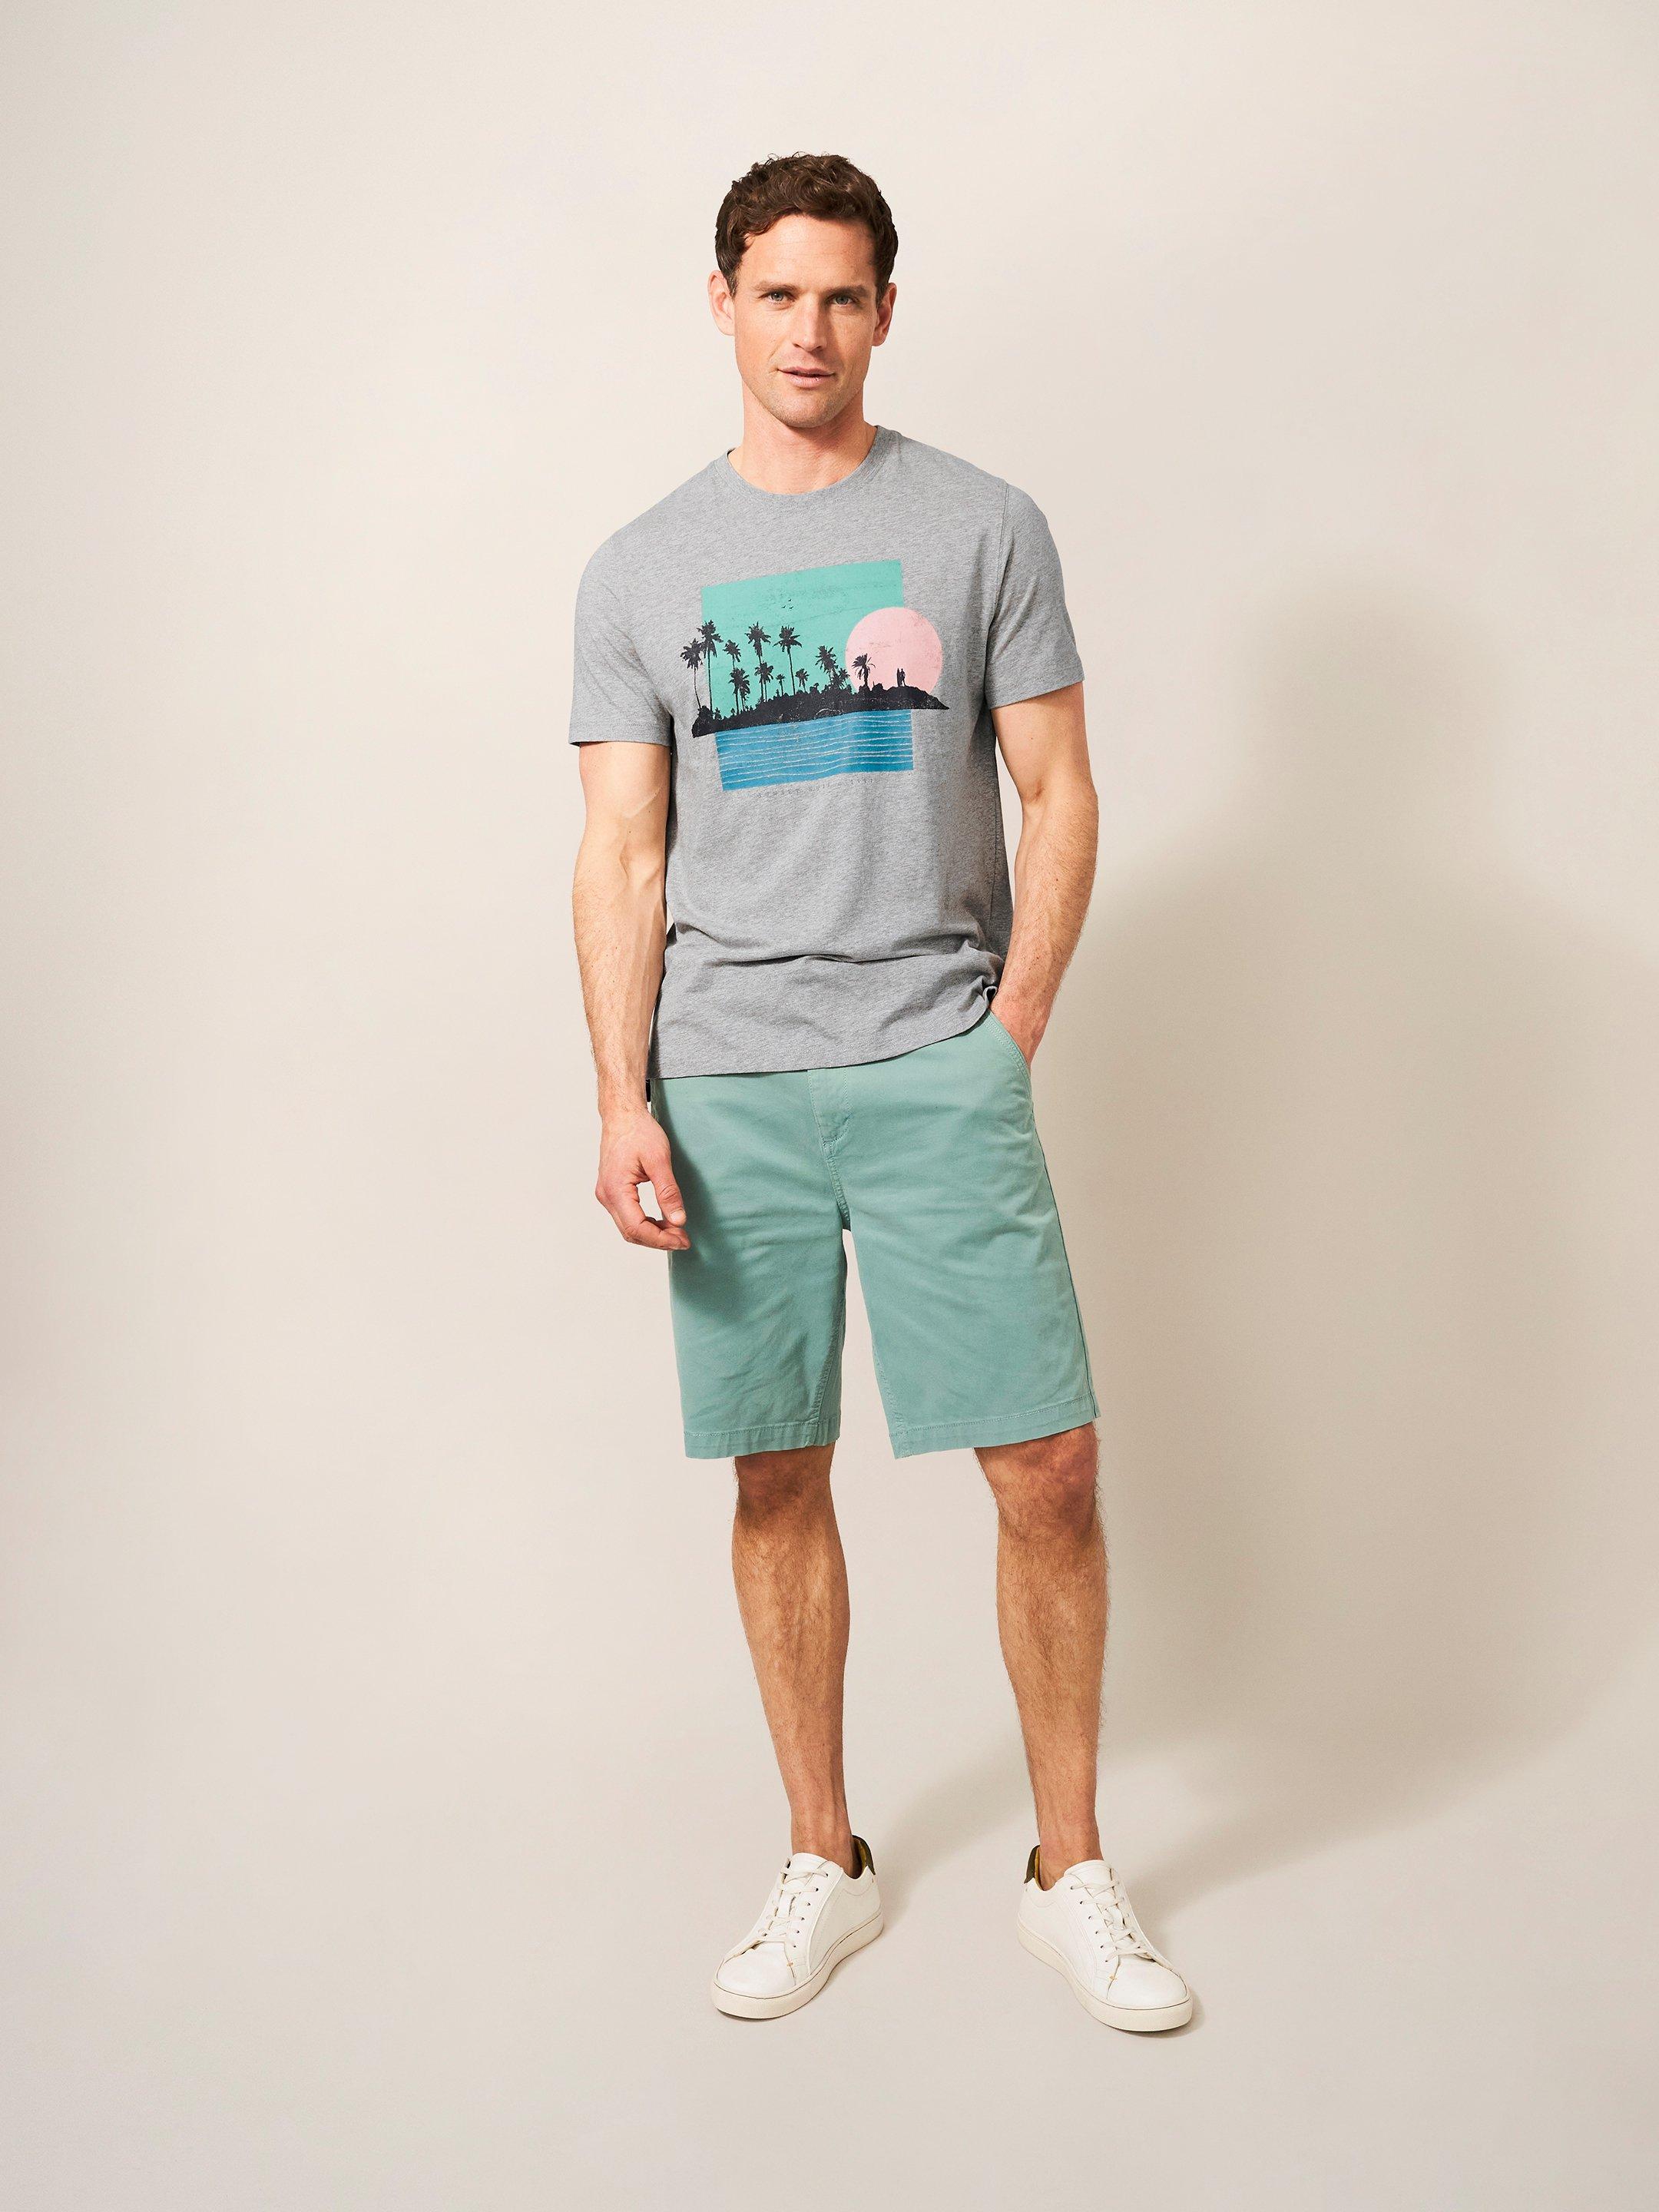 Sunset Surf Graphic Tee in GREY MARL - MODEL FRONT